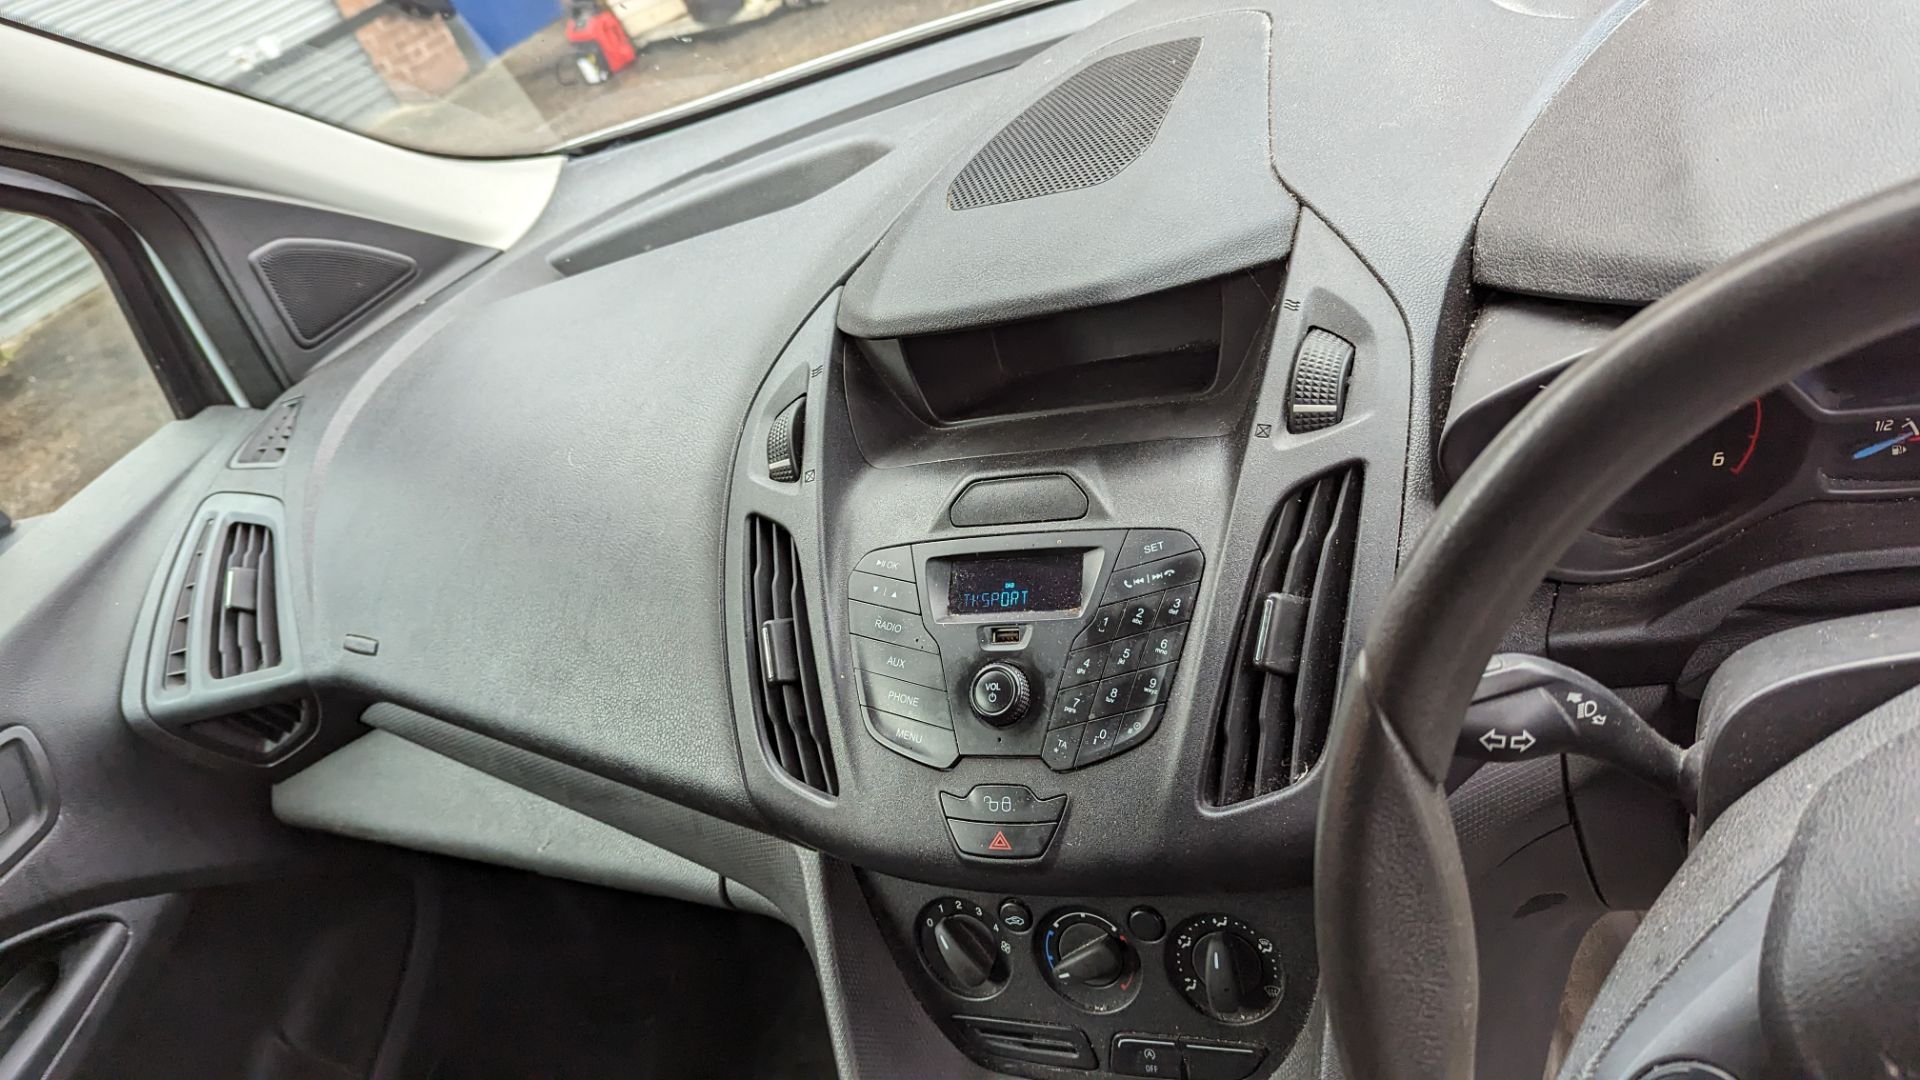 2014 Ford Transit Connect 200 panel van - Image 17 of 20